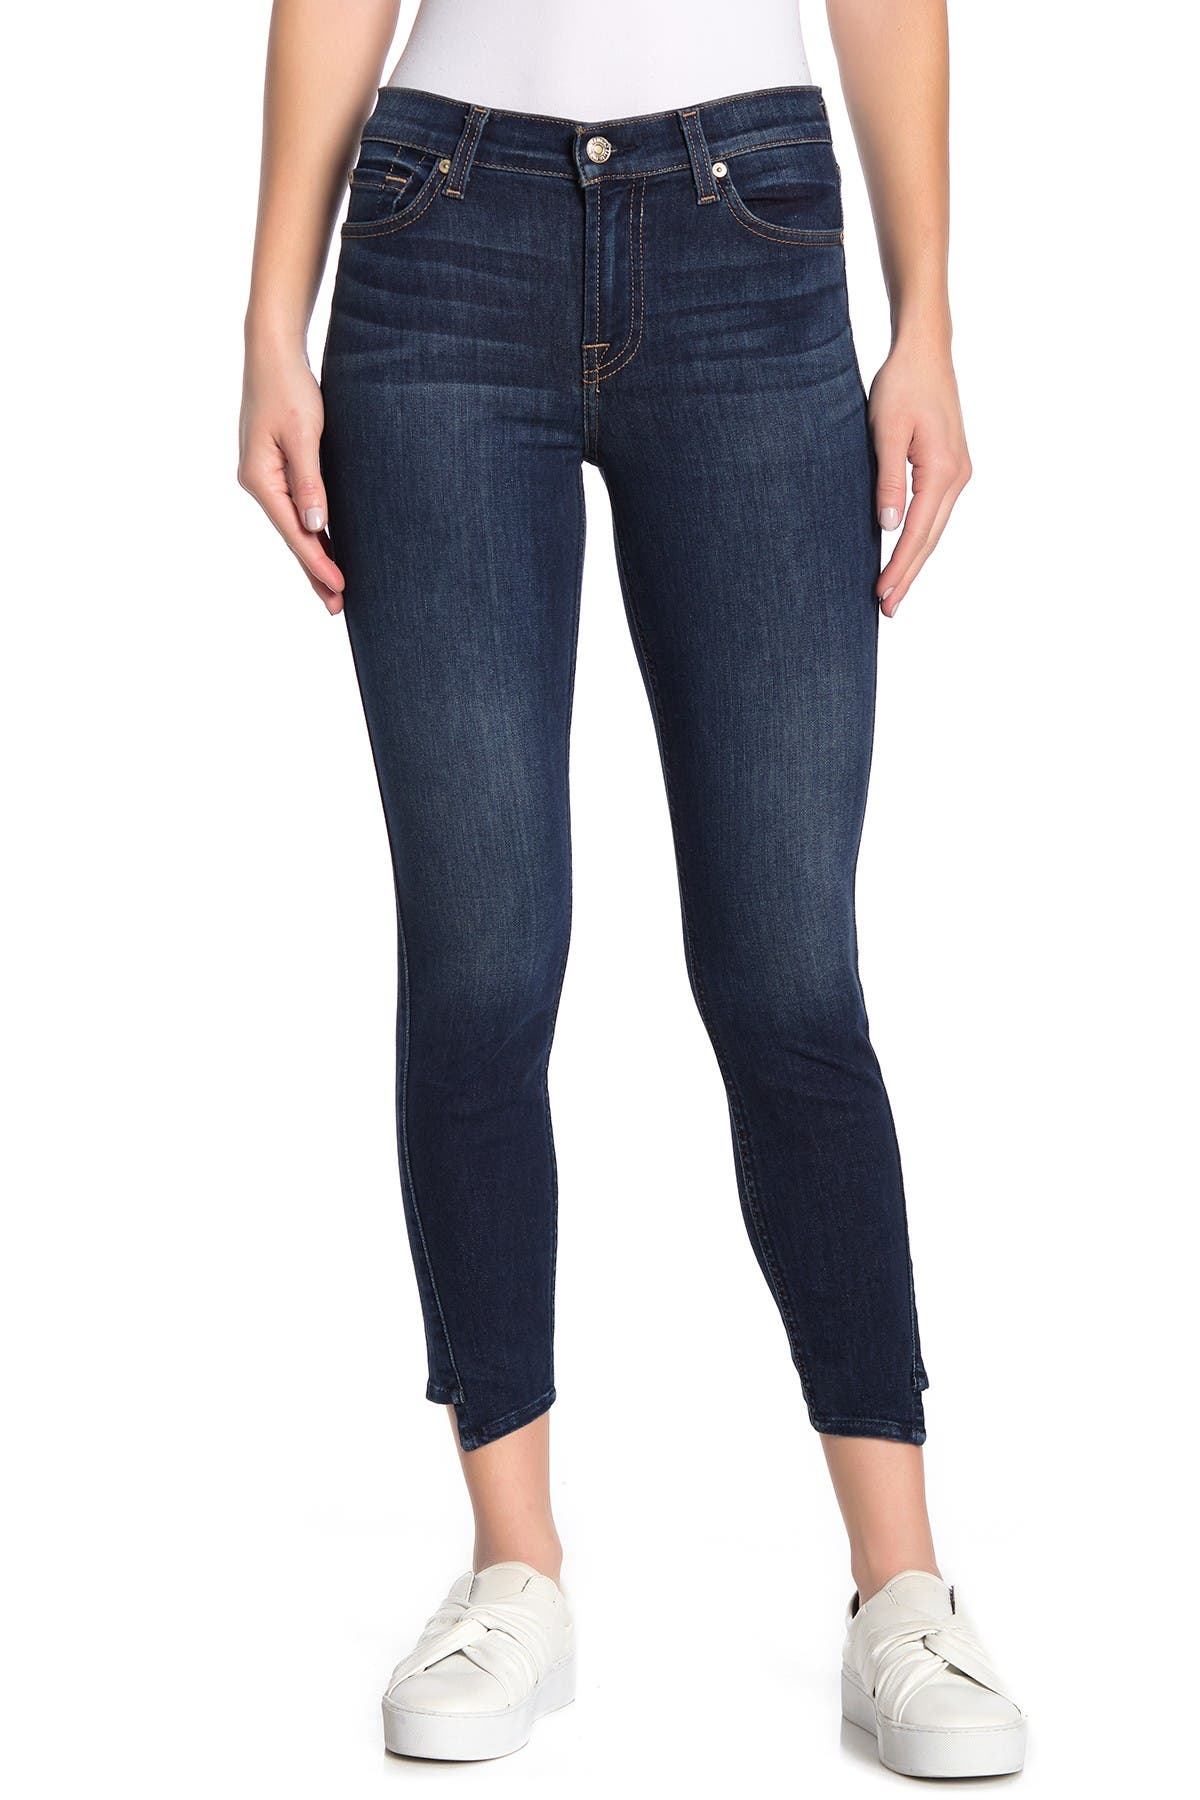 7 for all mankind jeans nordstrom rack